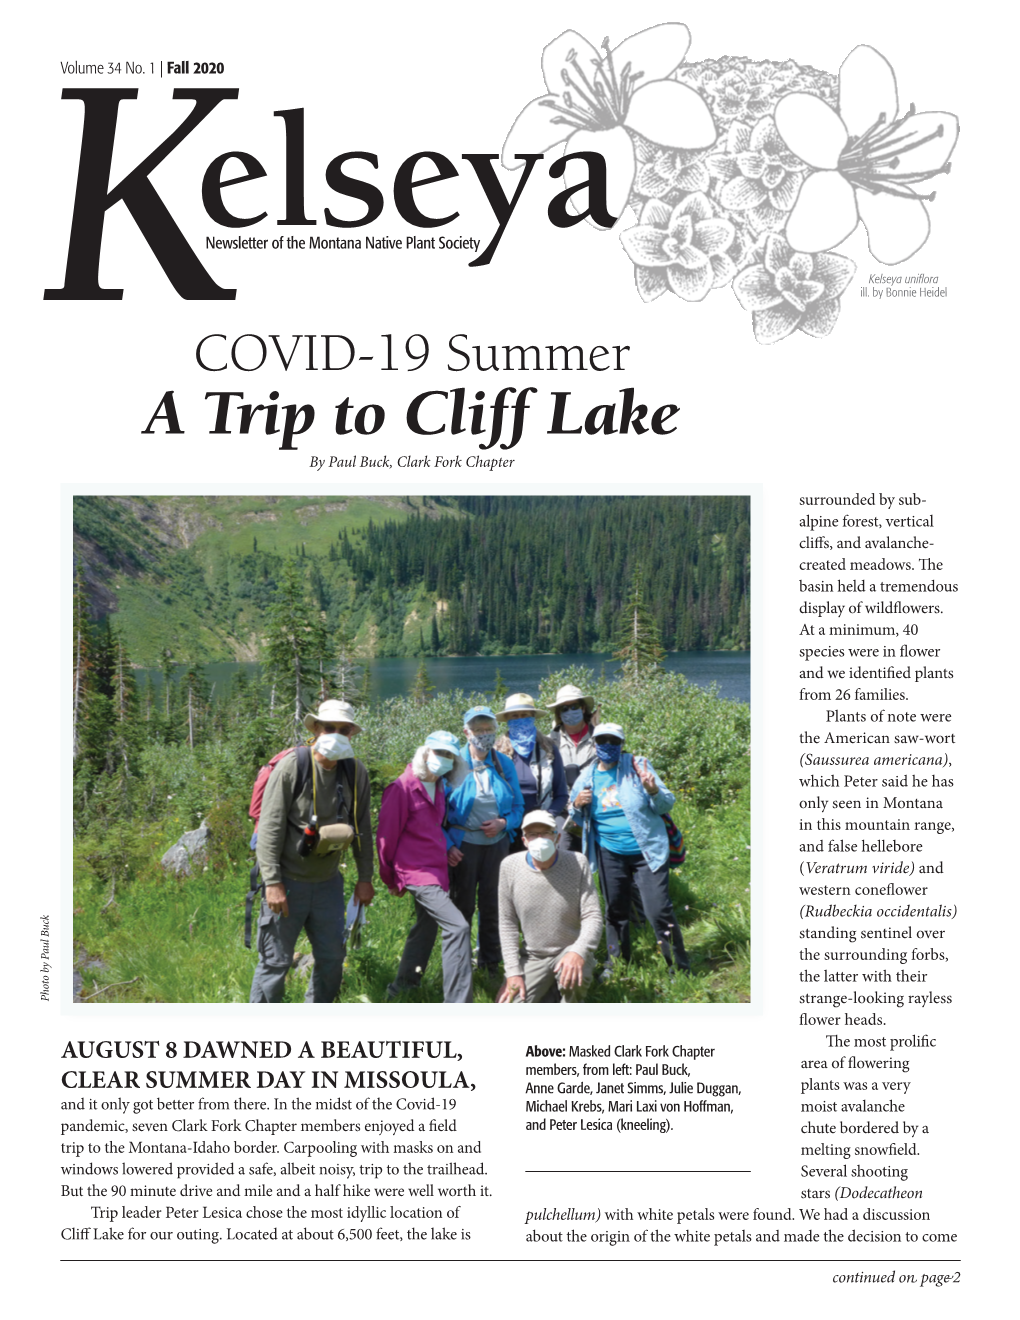 A Trip to Cliff Lake by Paul Buck, Clark Fork Chapter